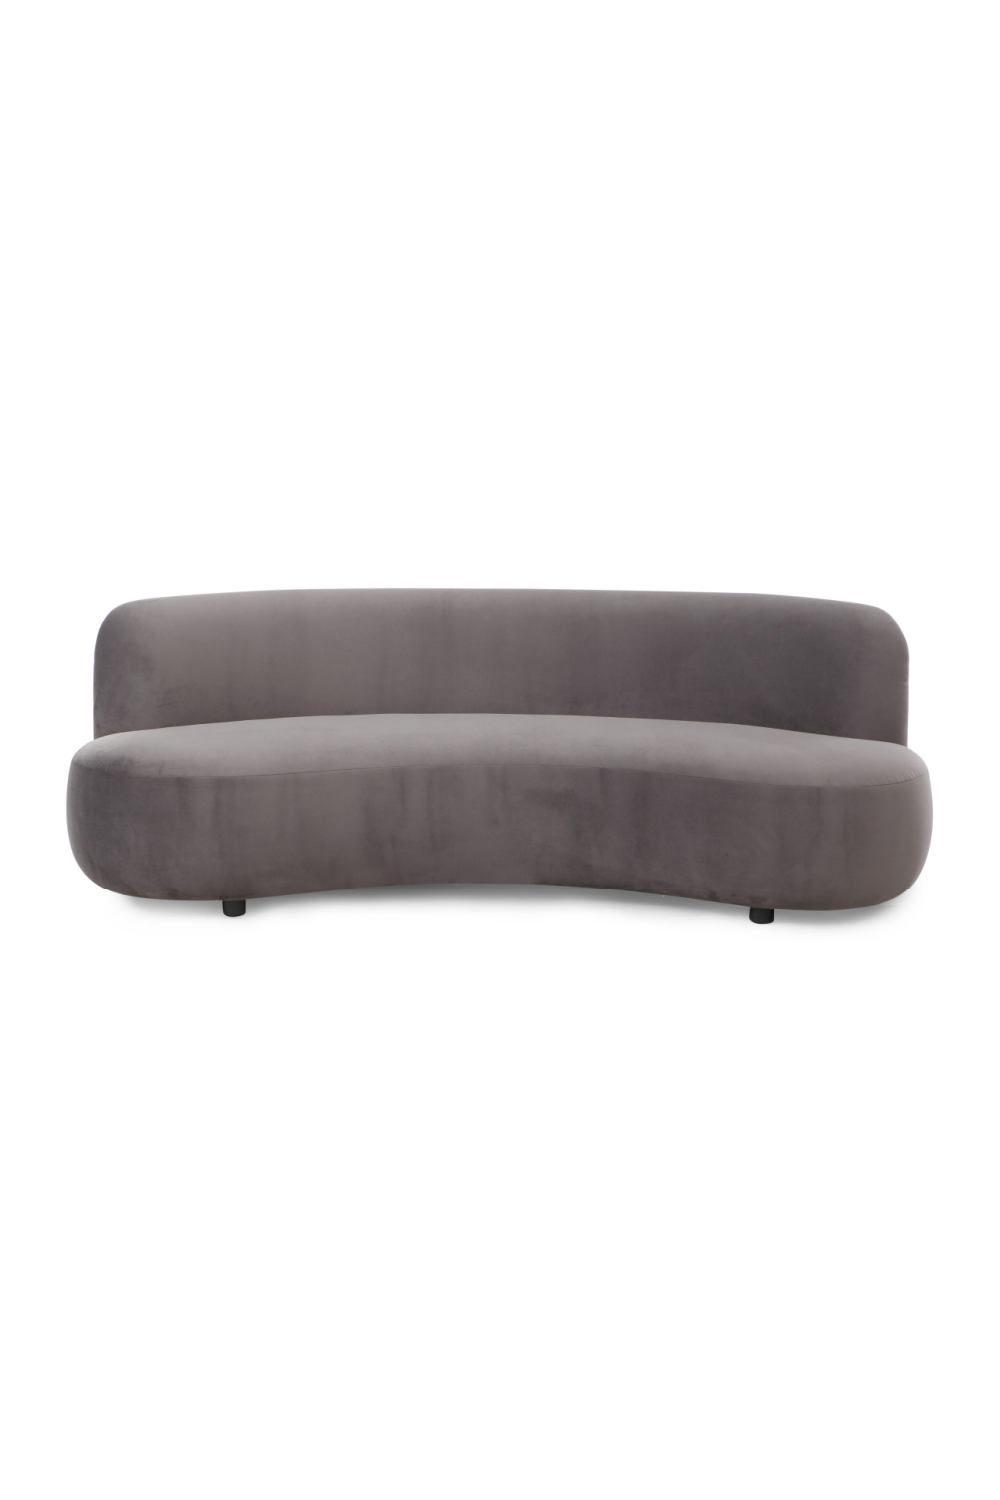 Modern Curved Sofa Liang &amp; Eimil Polter Liang &amp; Eimil - OROA